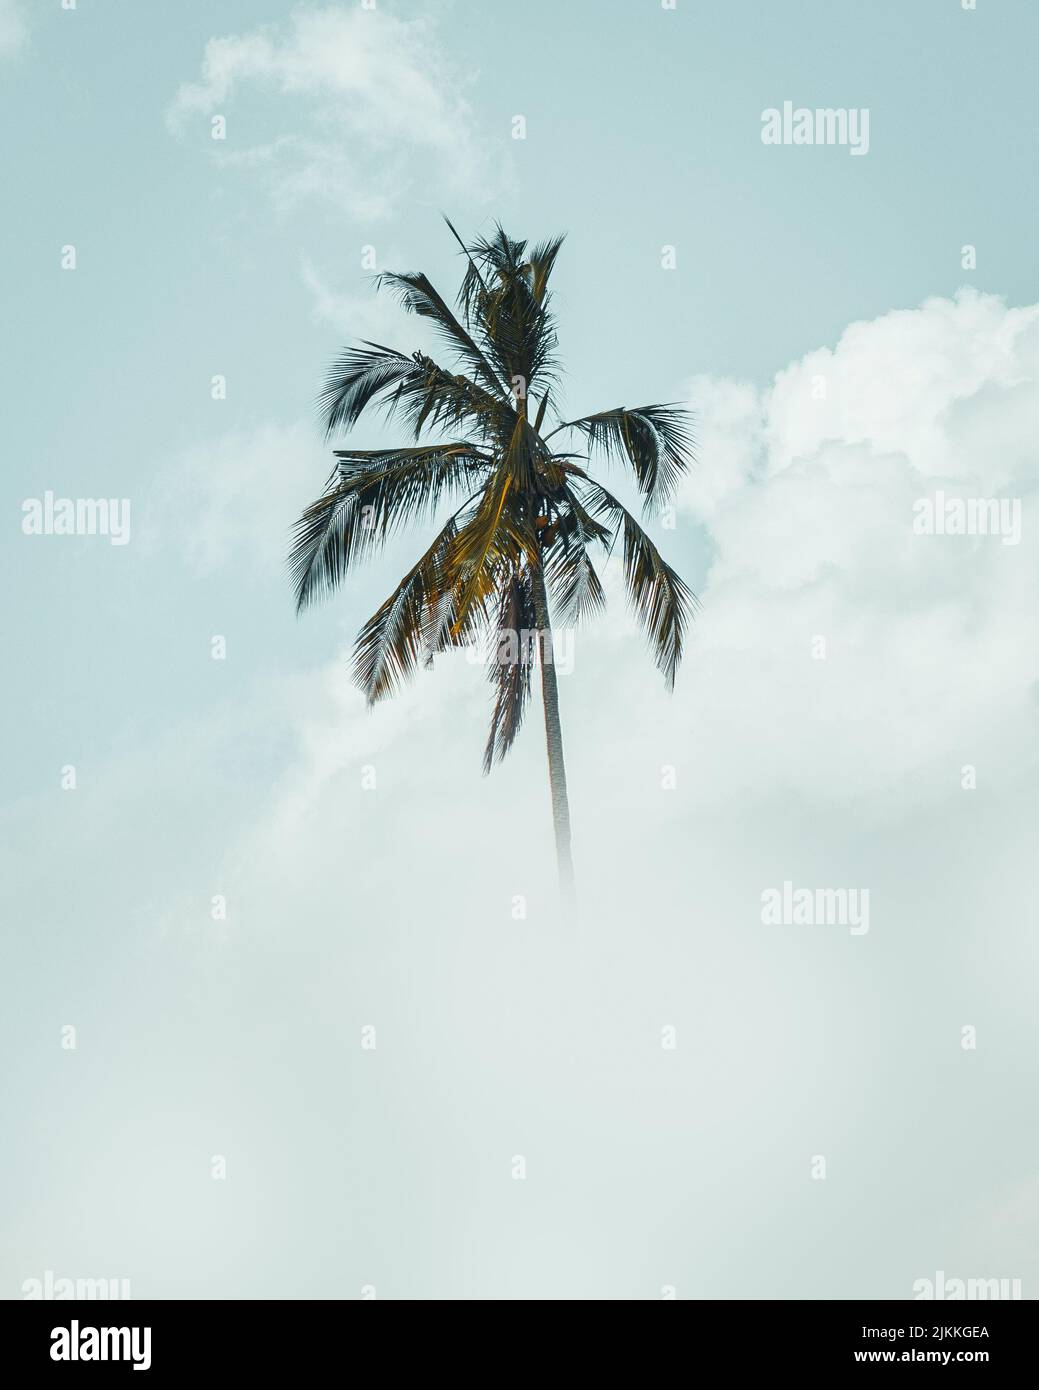 A palm tree high up in the clouds Stock Photo